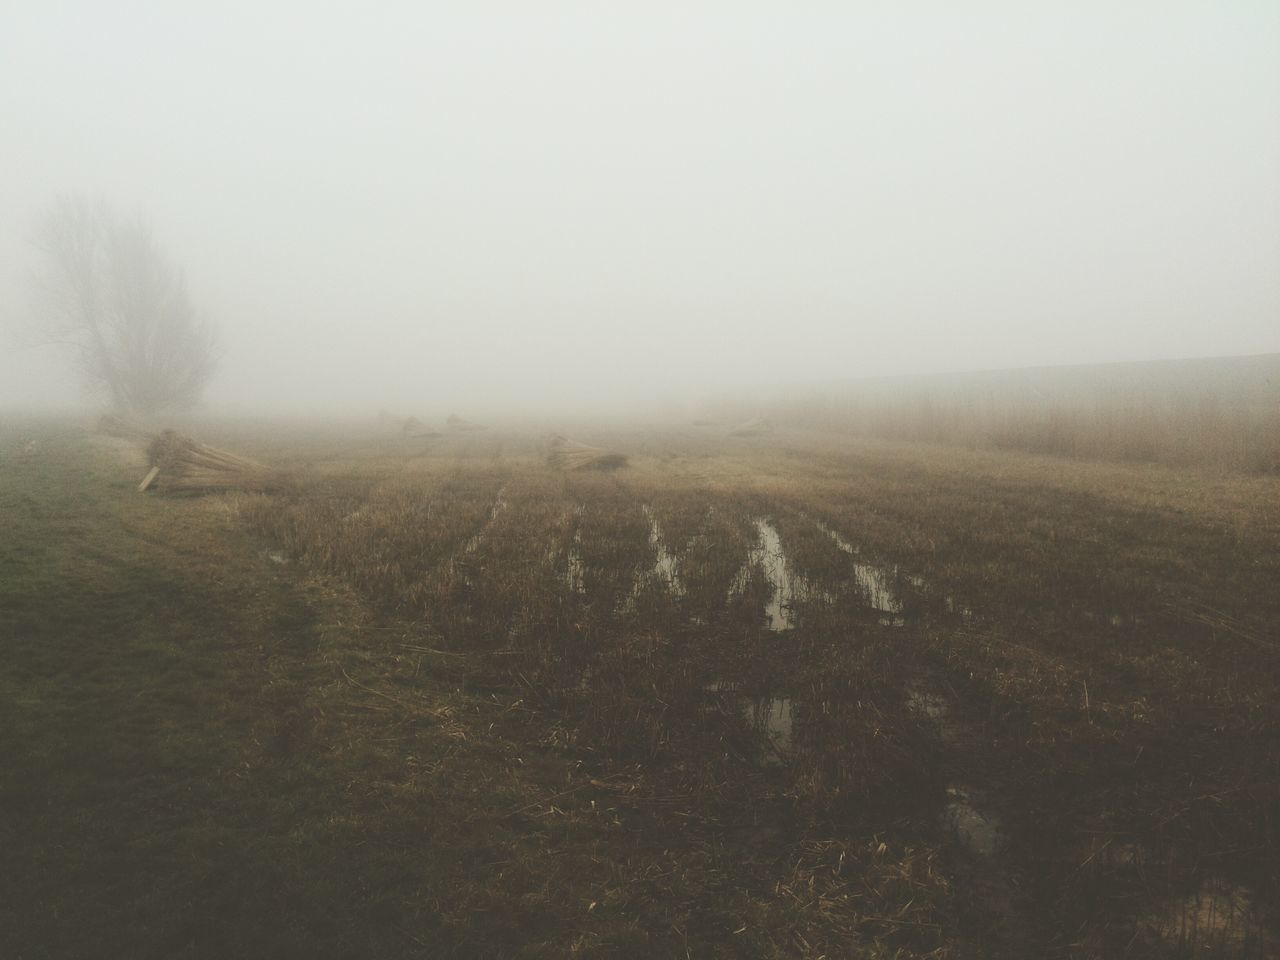 fog, foggy, weather, tranquil scene, tranquility, landscape, scenics, copy space, beauty in nature, nature, field, mist, non-urban scene, winter, sky, day, remote, no people, idyllic